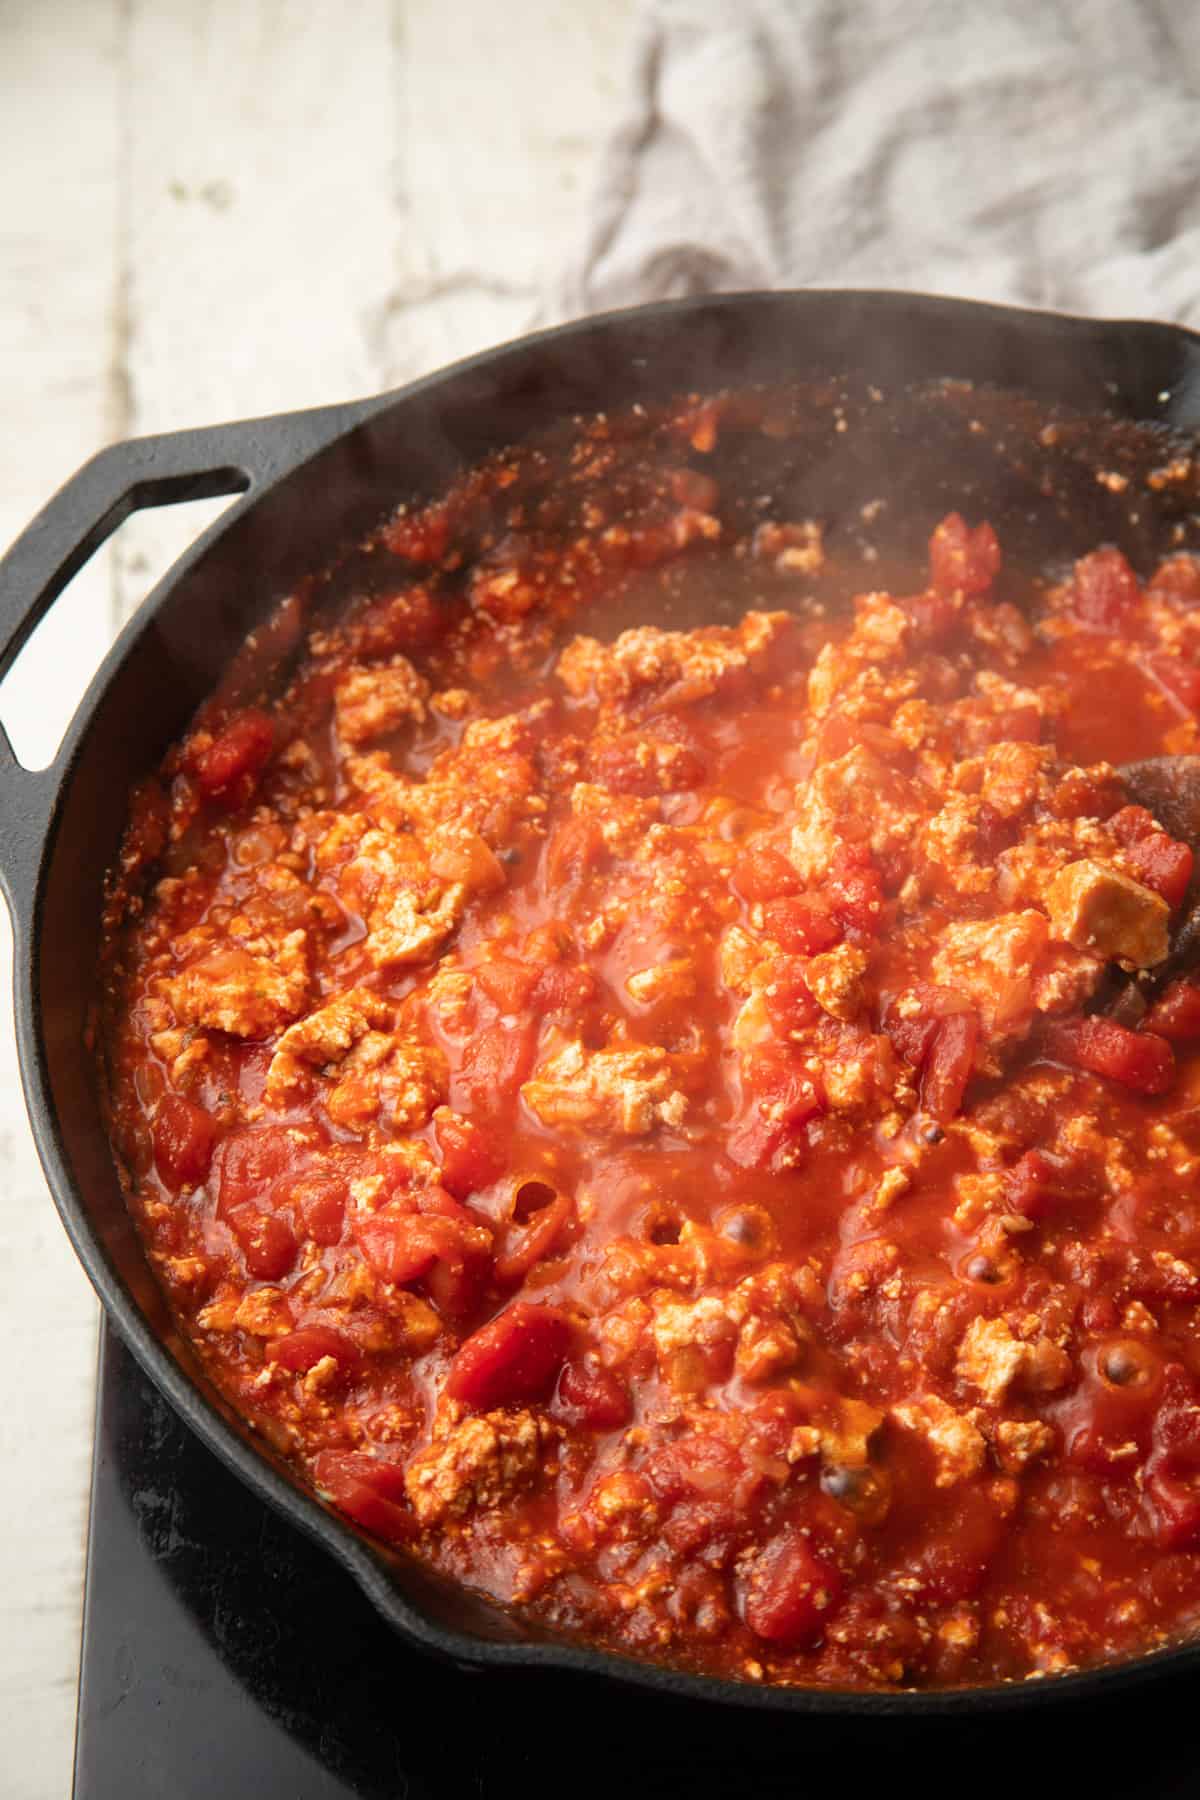 Tofu and tomato sauce simmering in a skillet.